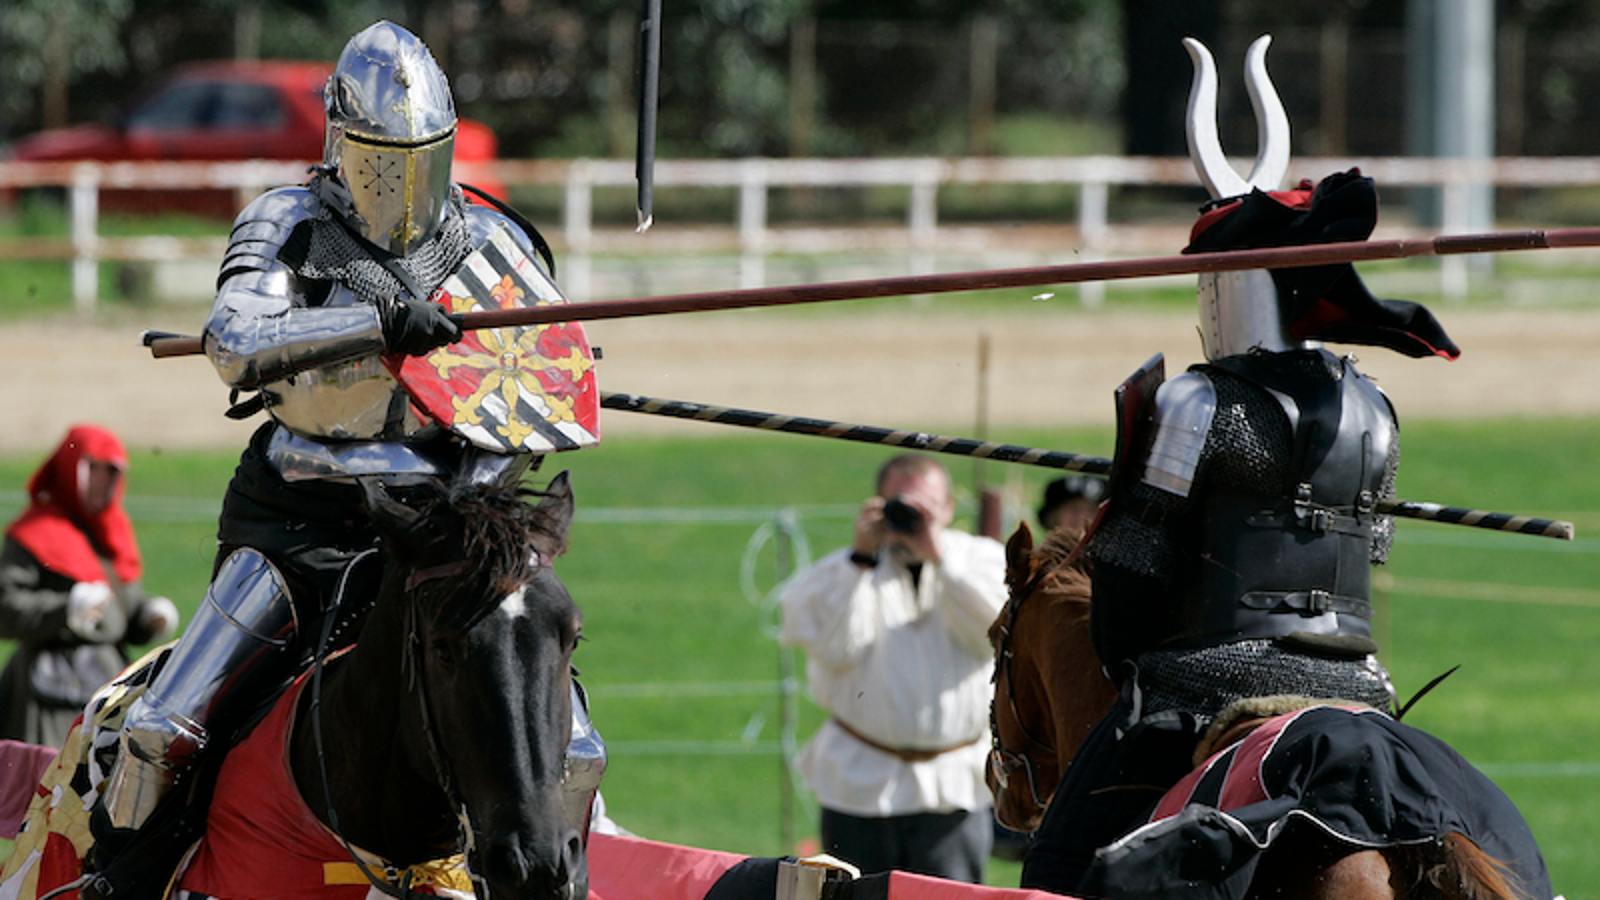 After Only 1,000 Years, Jousting Competitions Open to Female Knights